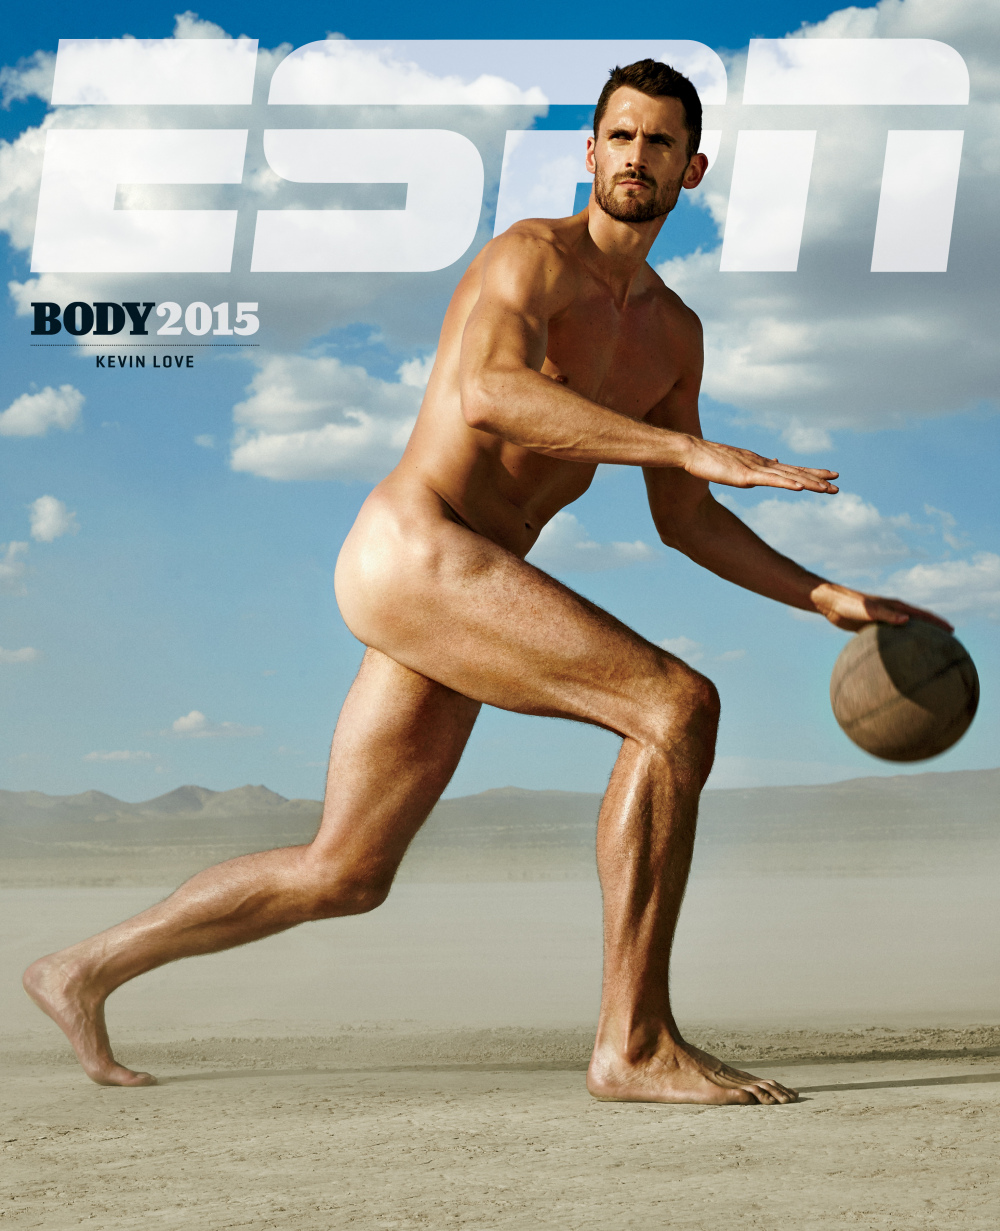 Espn Unveils All Covers From The Body Issue For